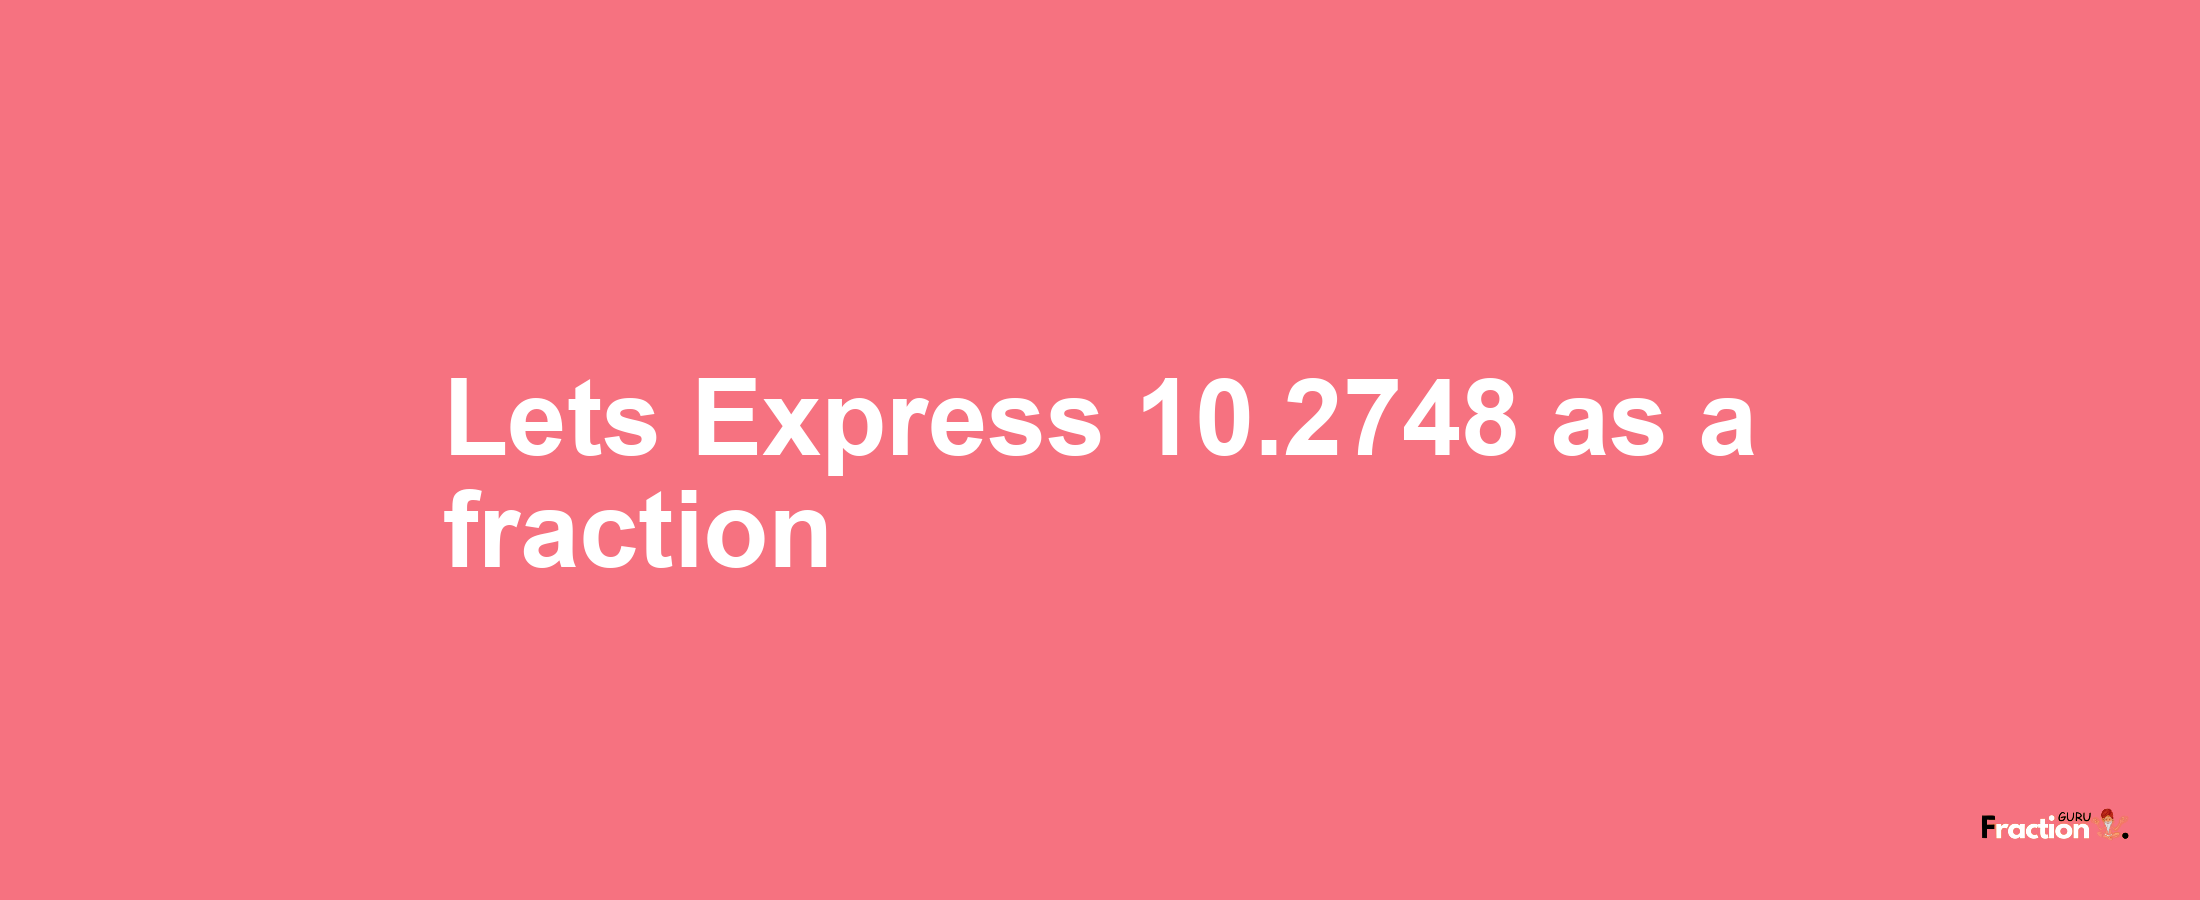 Lets Express 10.2748 as afraction